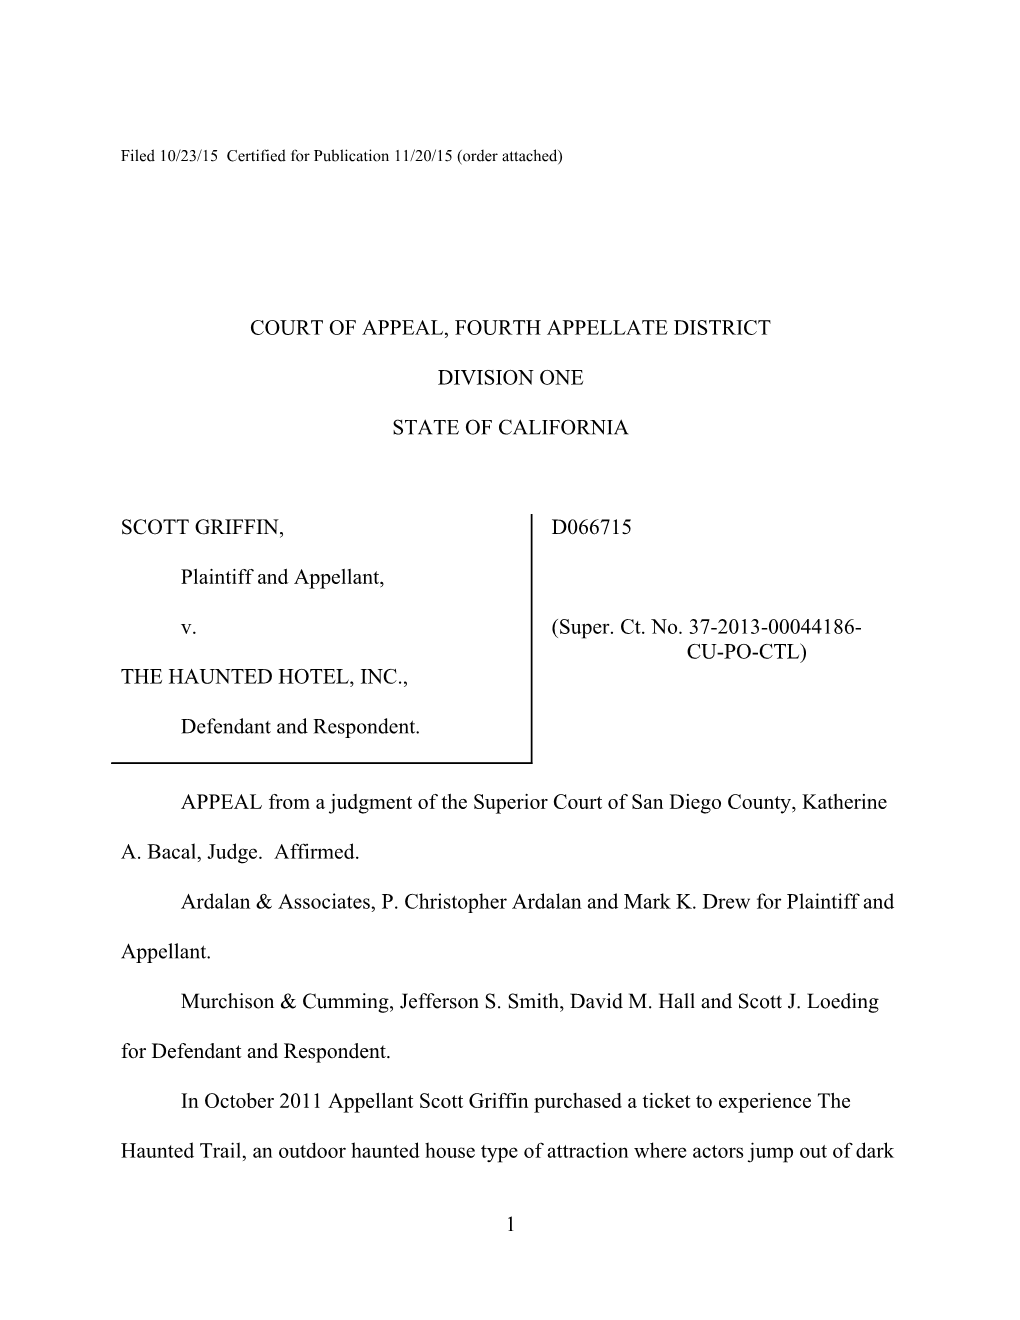 Filed 10/23/15 Certified for Publication 11/20/15 (Order Attached)